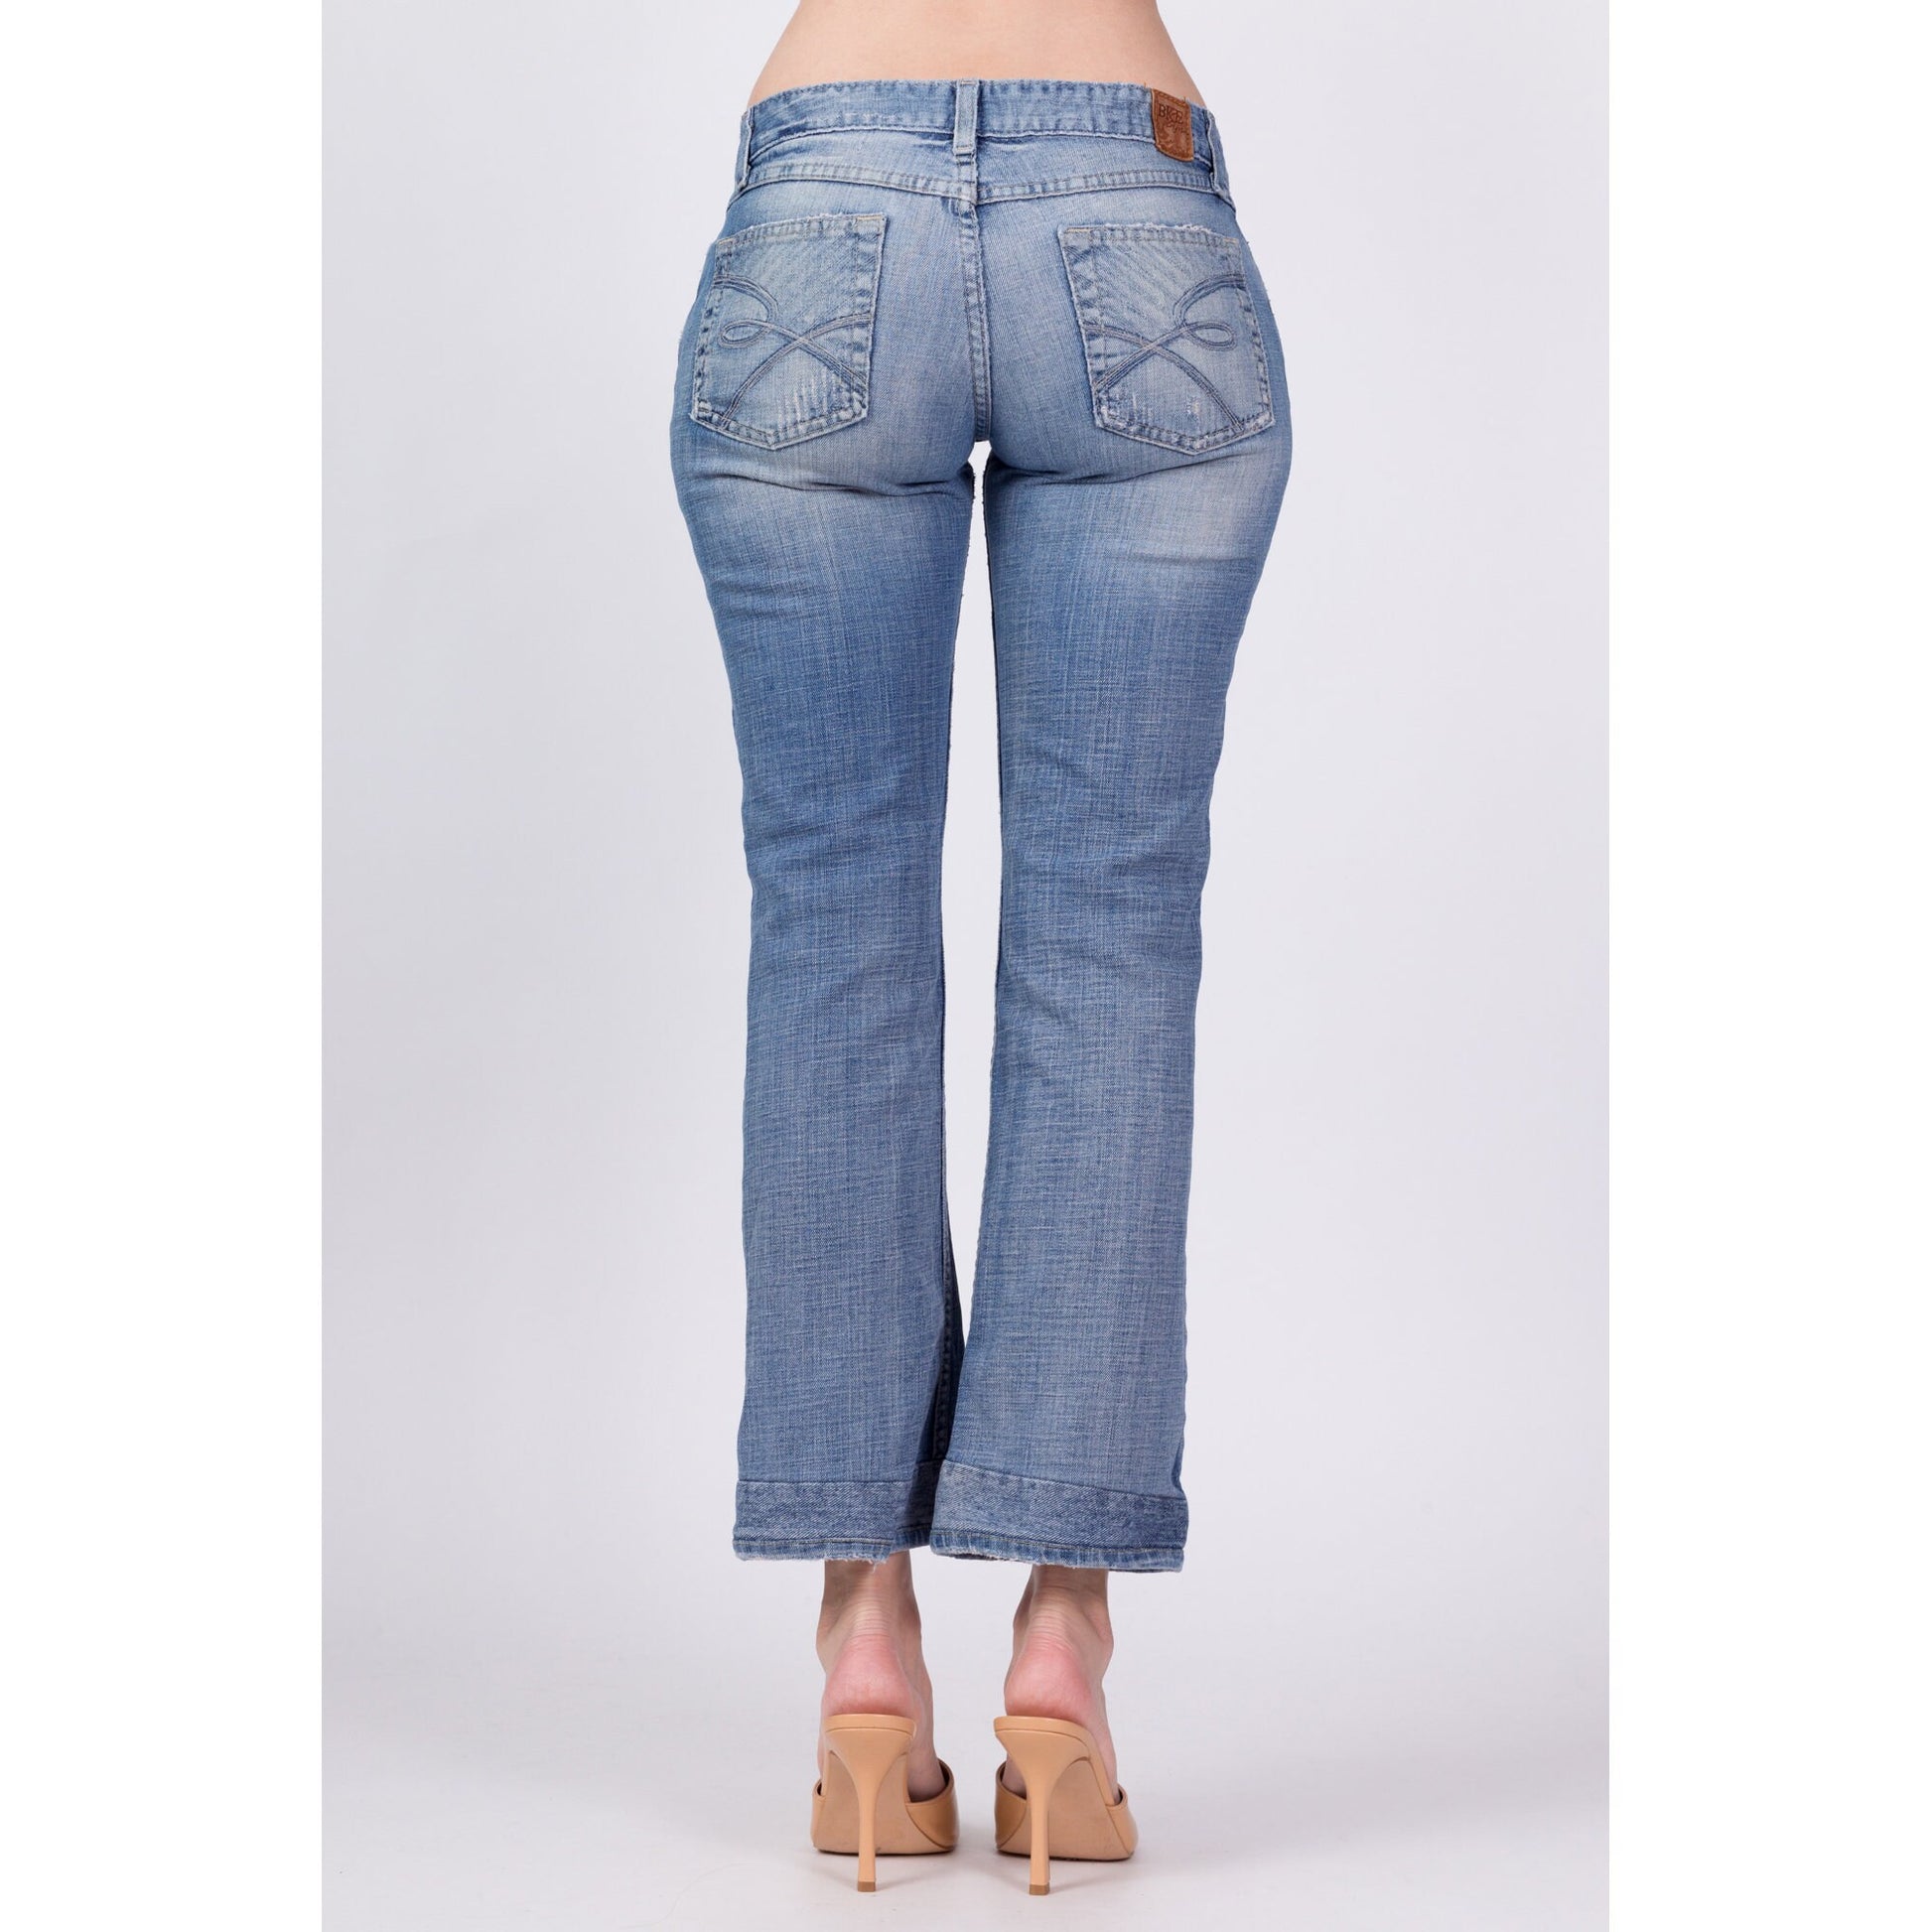 Lucky Brand Vintage Y2K Jeans Low Rise Easy Fit Flare Denim